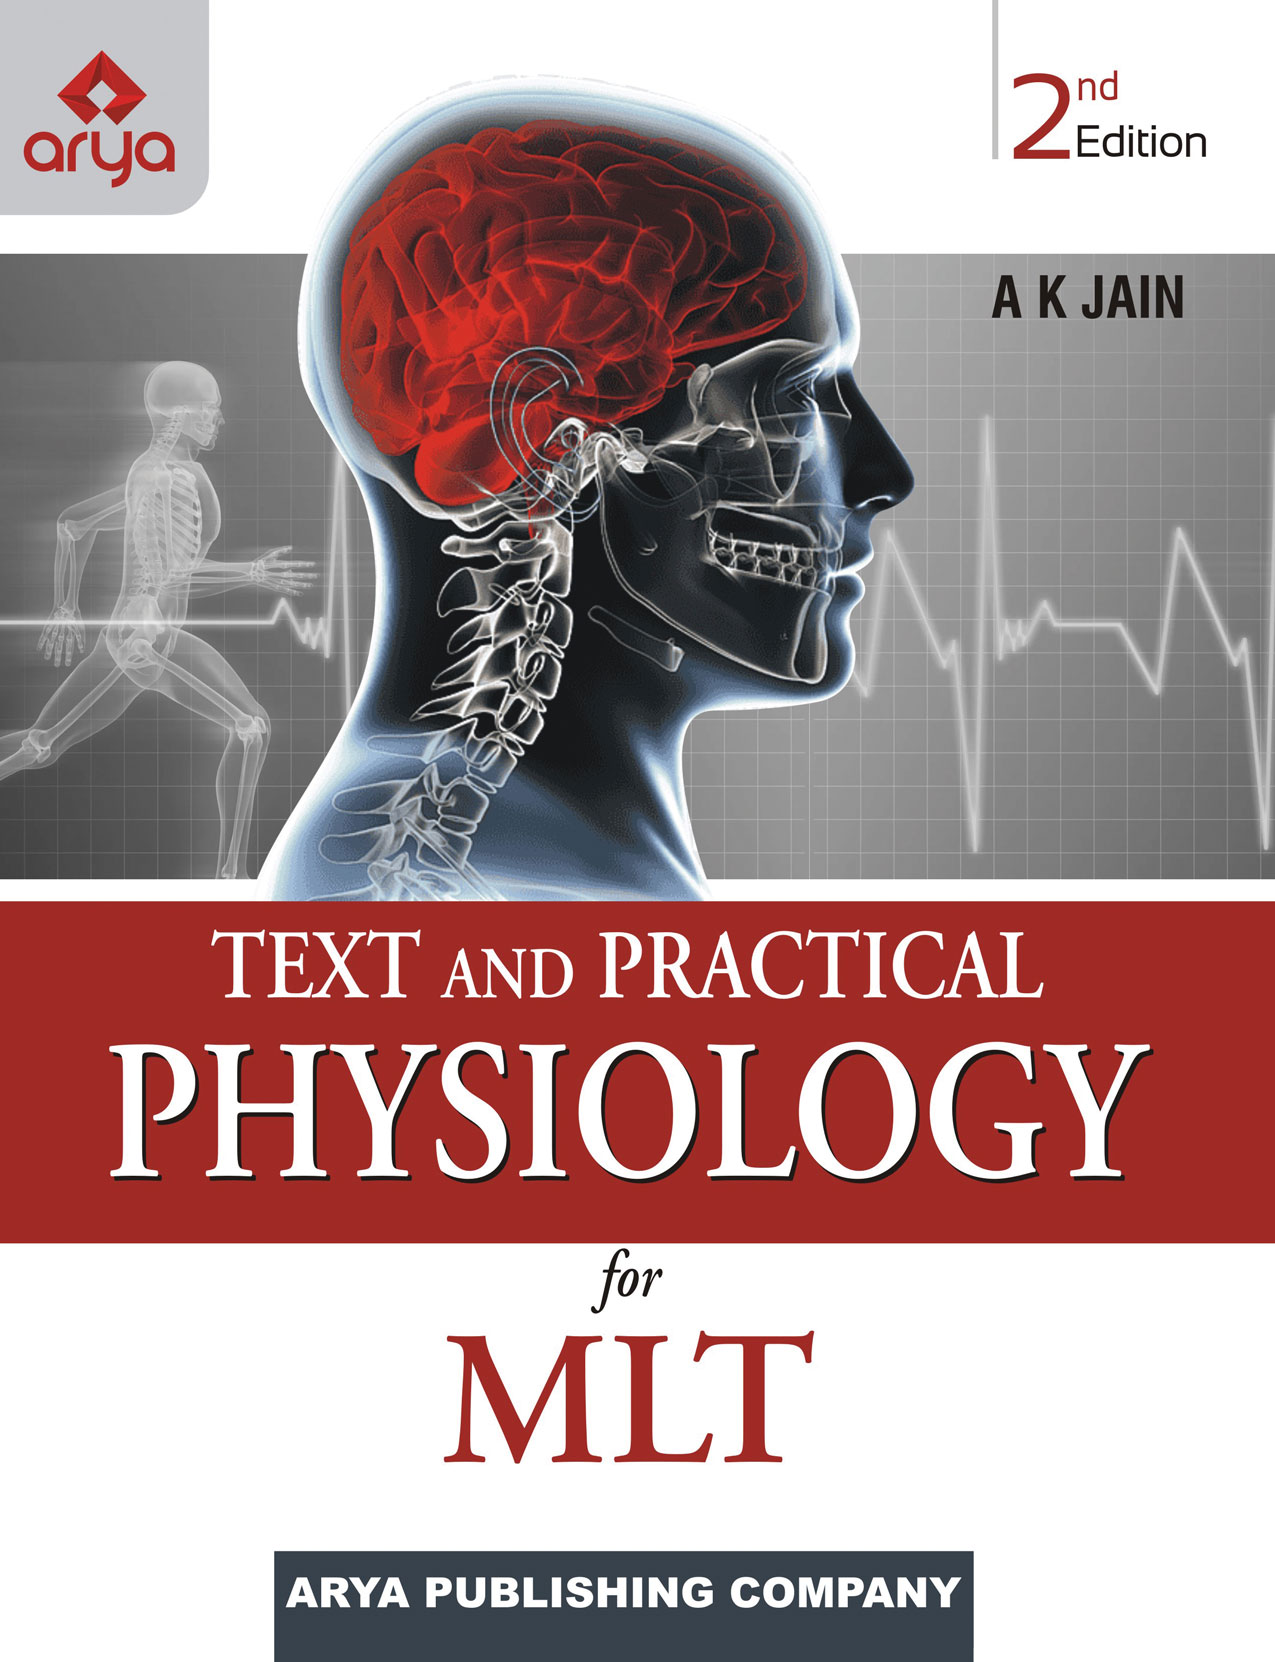 Text & Practical Physiology for MLT 